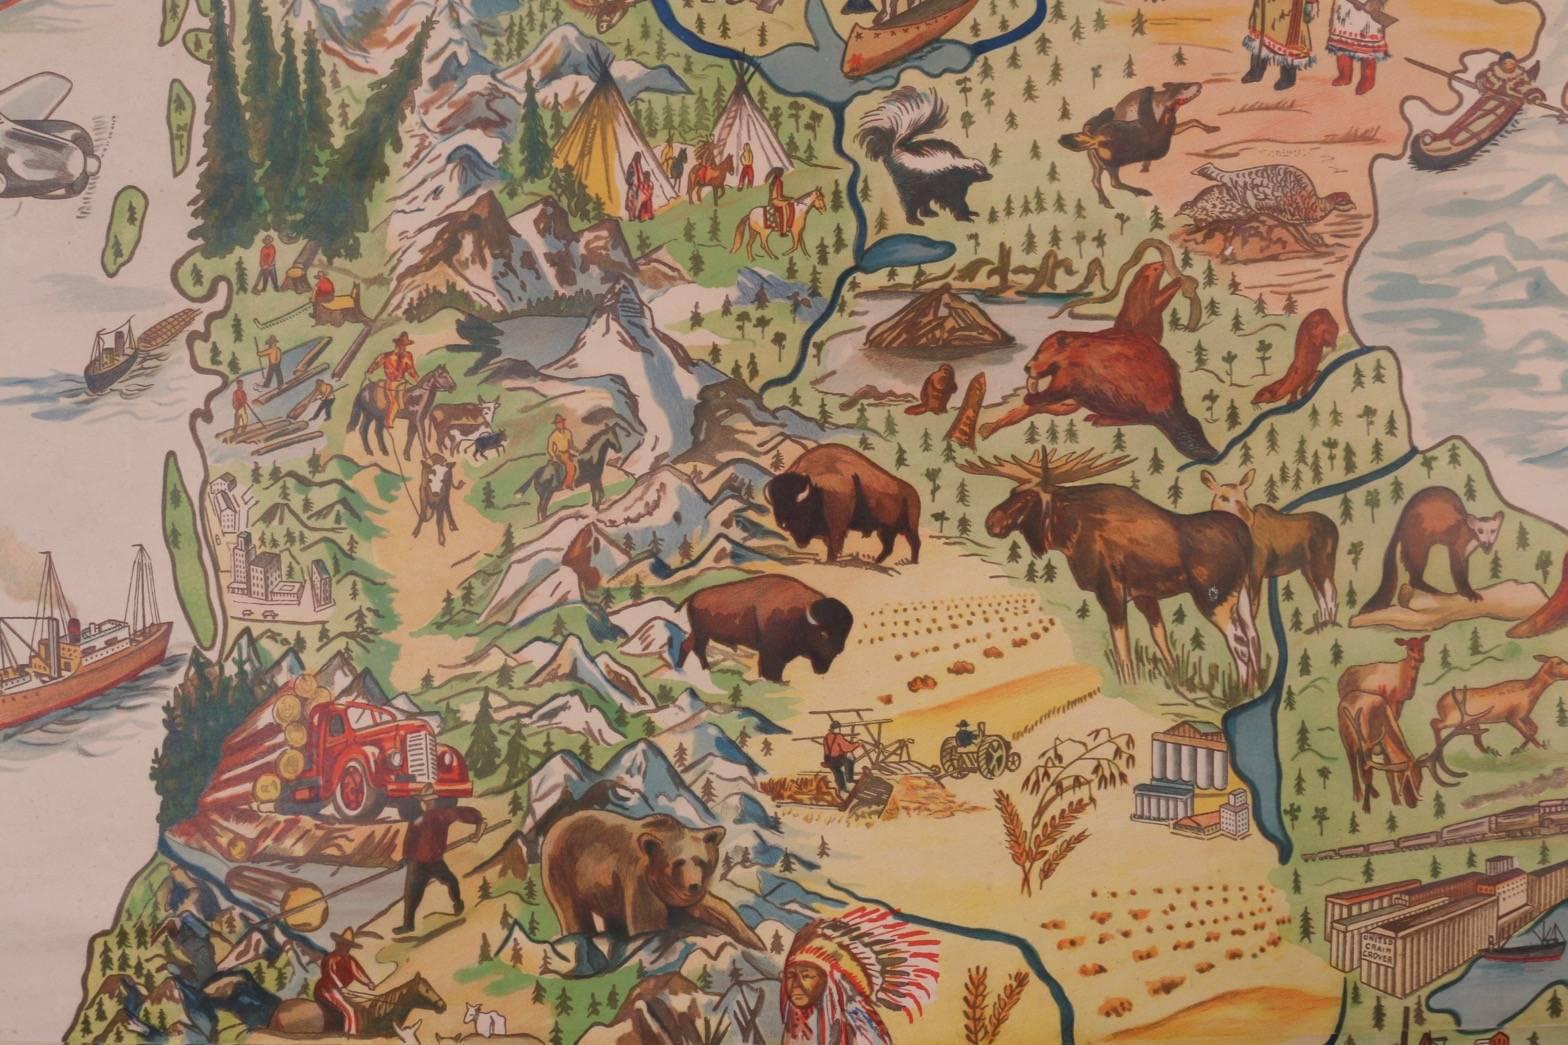 Large pictorial map of North America, circa 1935 by Palmer and
Associates, Los Angeles, circa 1935. The most beautiful pictorial map we have ever seen. All original lithograph mounted on linen and attached to wooden dowels at both ends so it can be